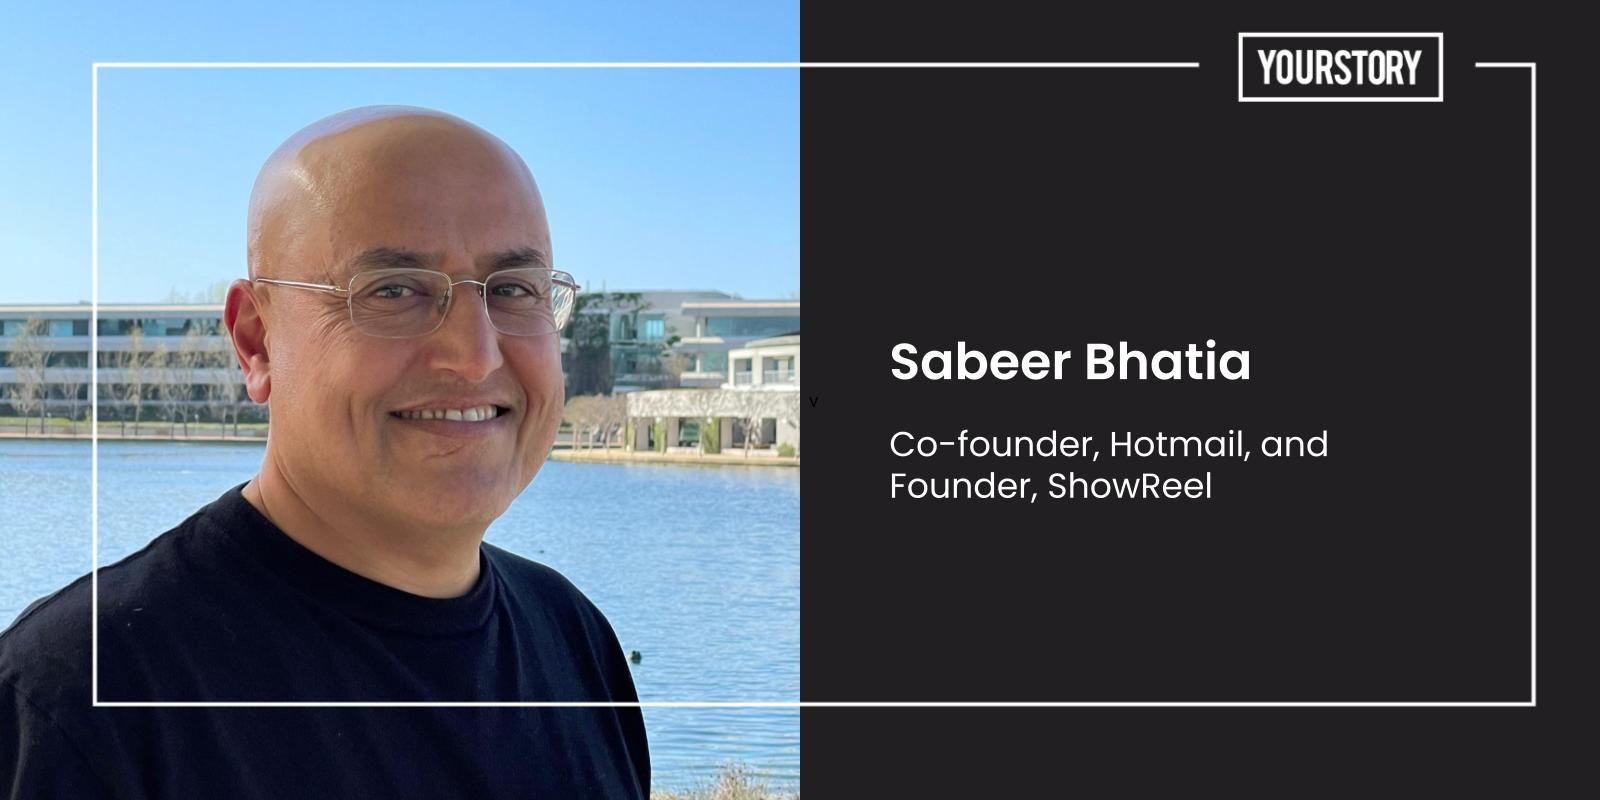 Hotmail Co-founder Sabeer Bhatia launches social video platform ShowReel to connect job seekers and companies